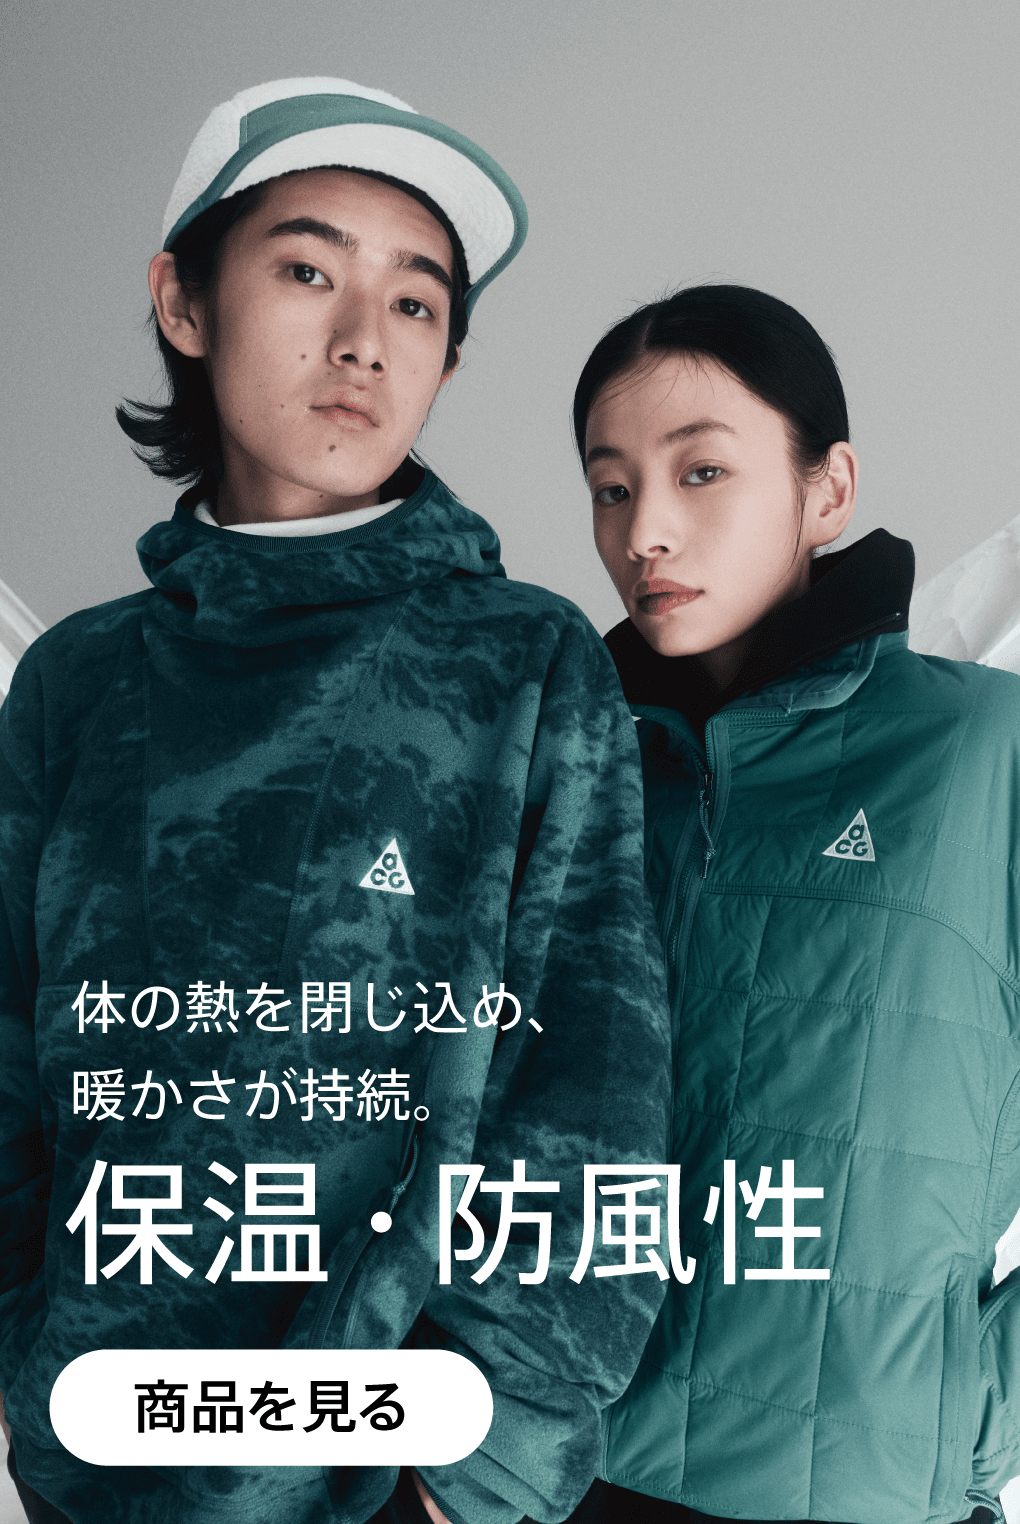 Storm-FIT Clothing. Nike JP